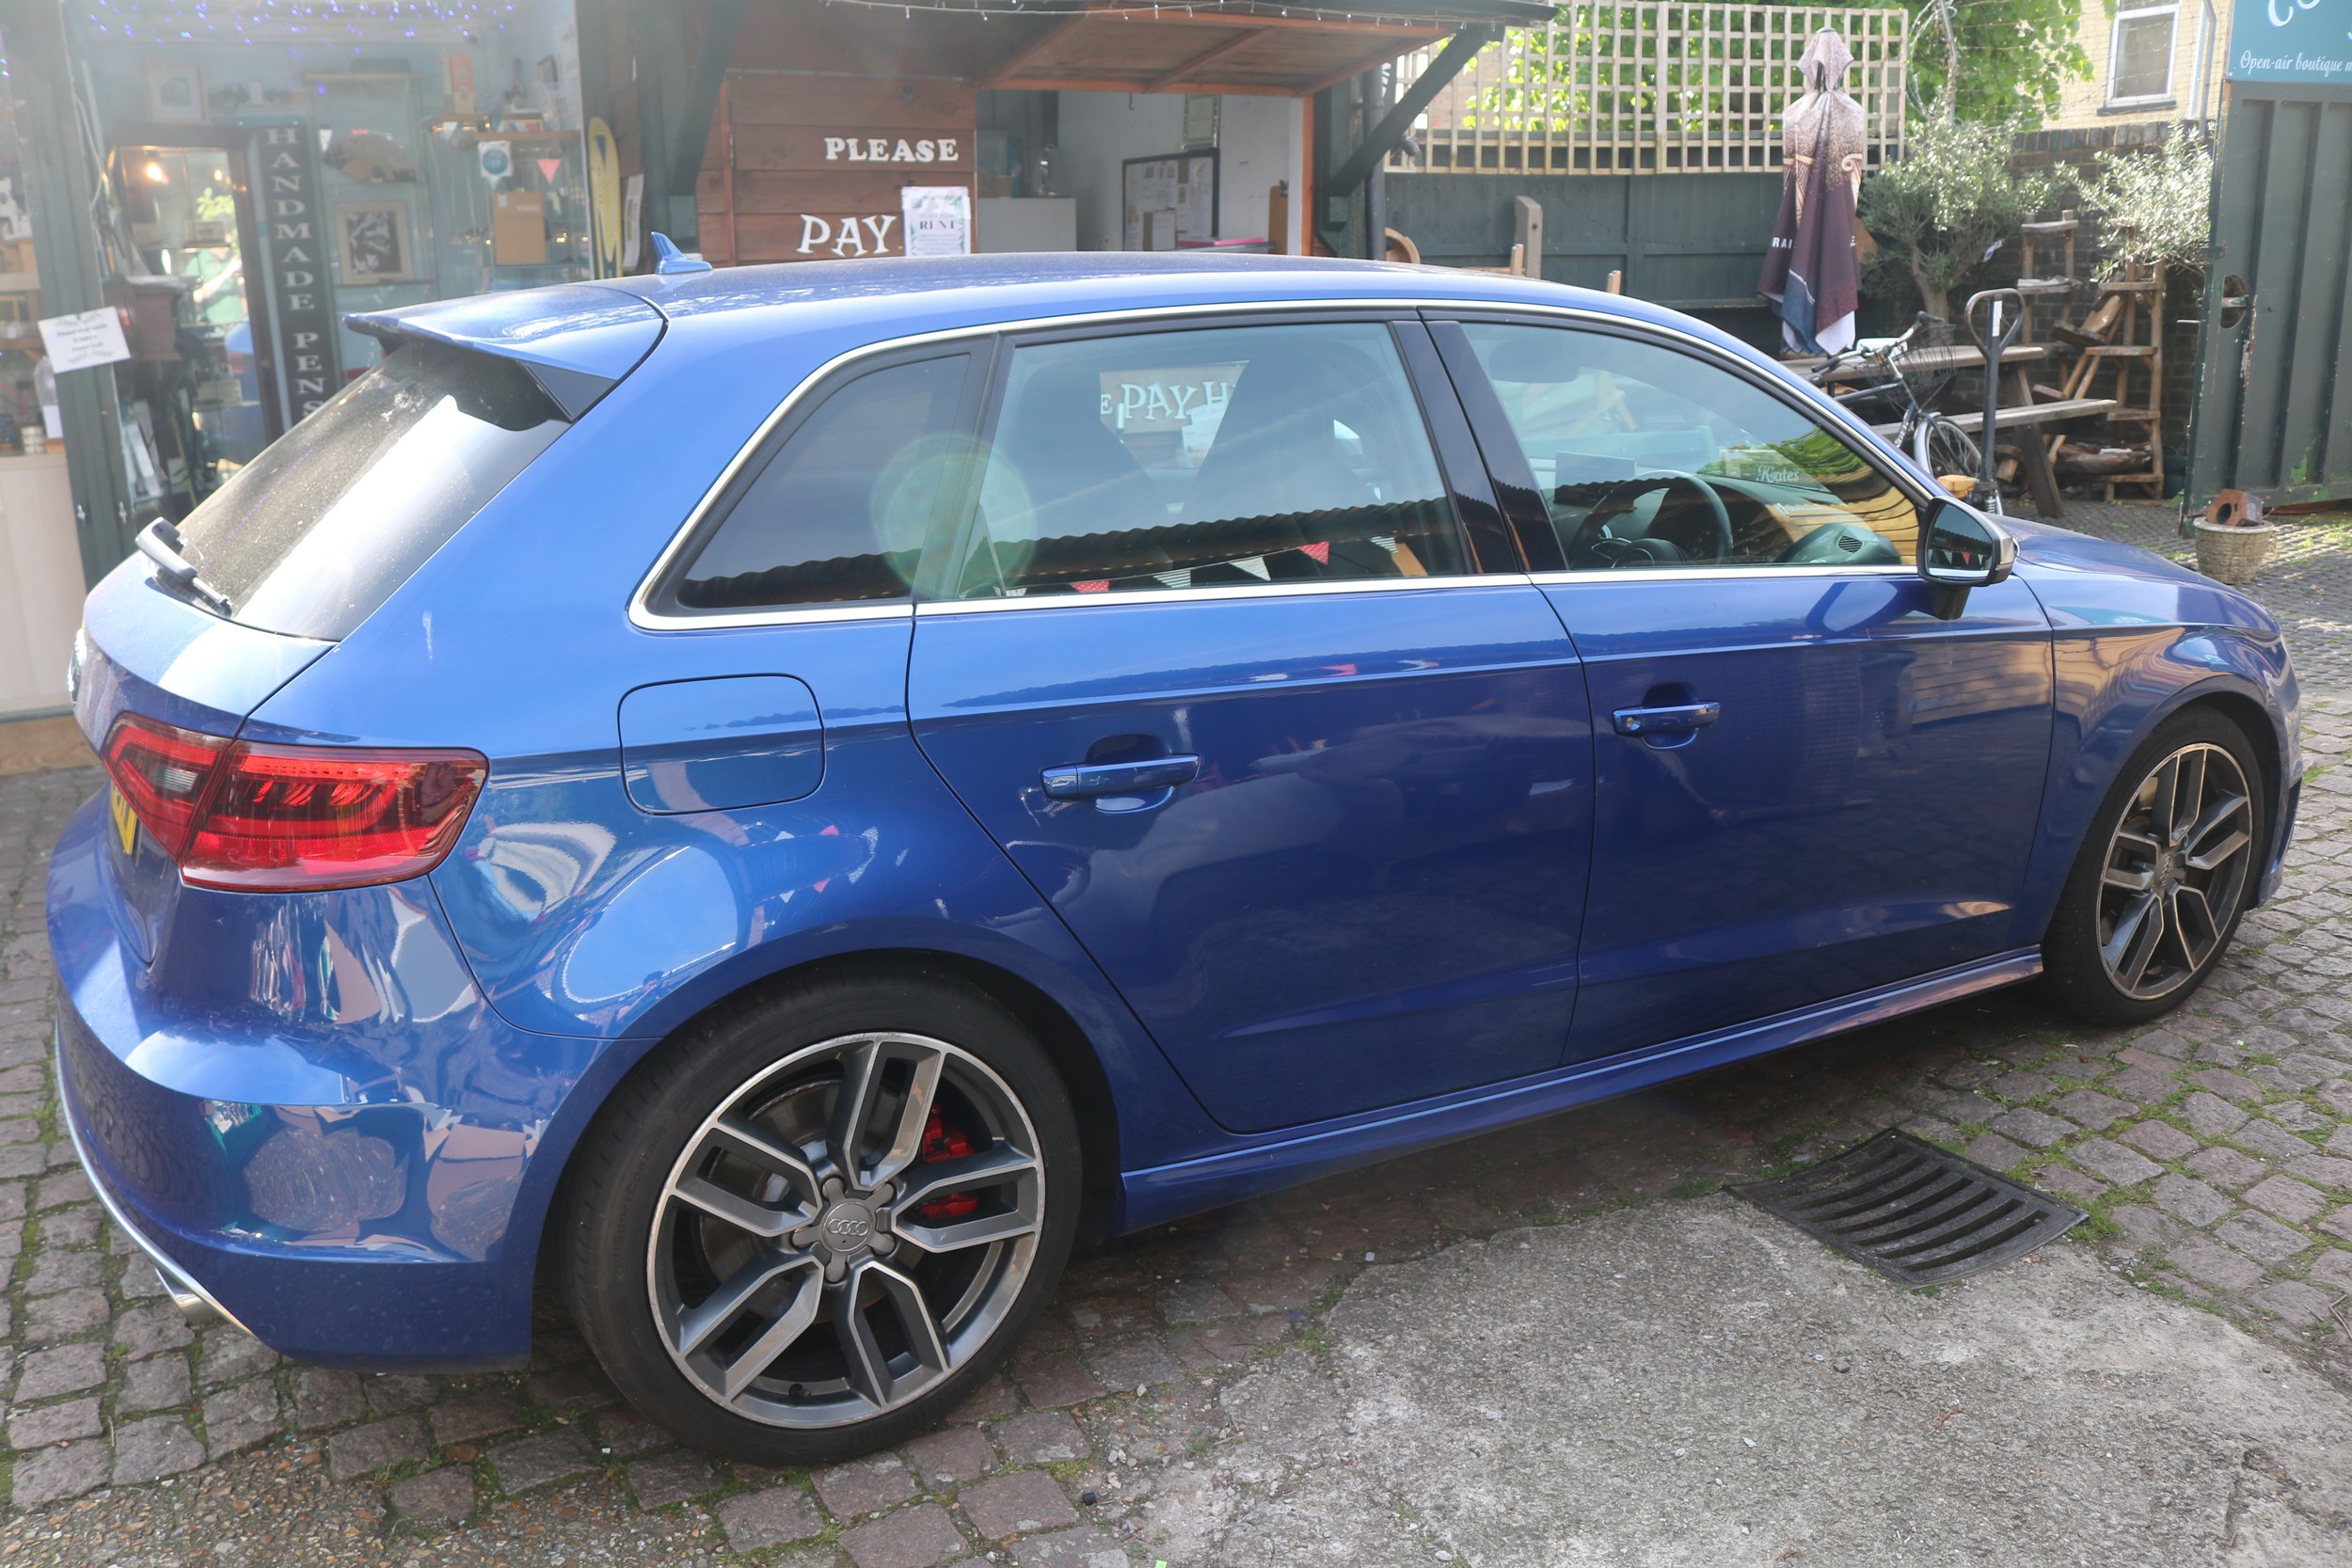 Audi A3 Sportback S3 TFSI Quattro 5dr S Tronic (Nav) 2016 Blue Automatic 2 Litre with 3 Keys Logbook - Image 12 of 18